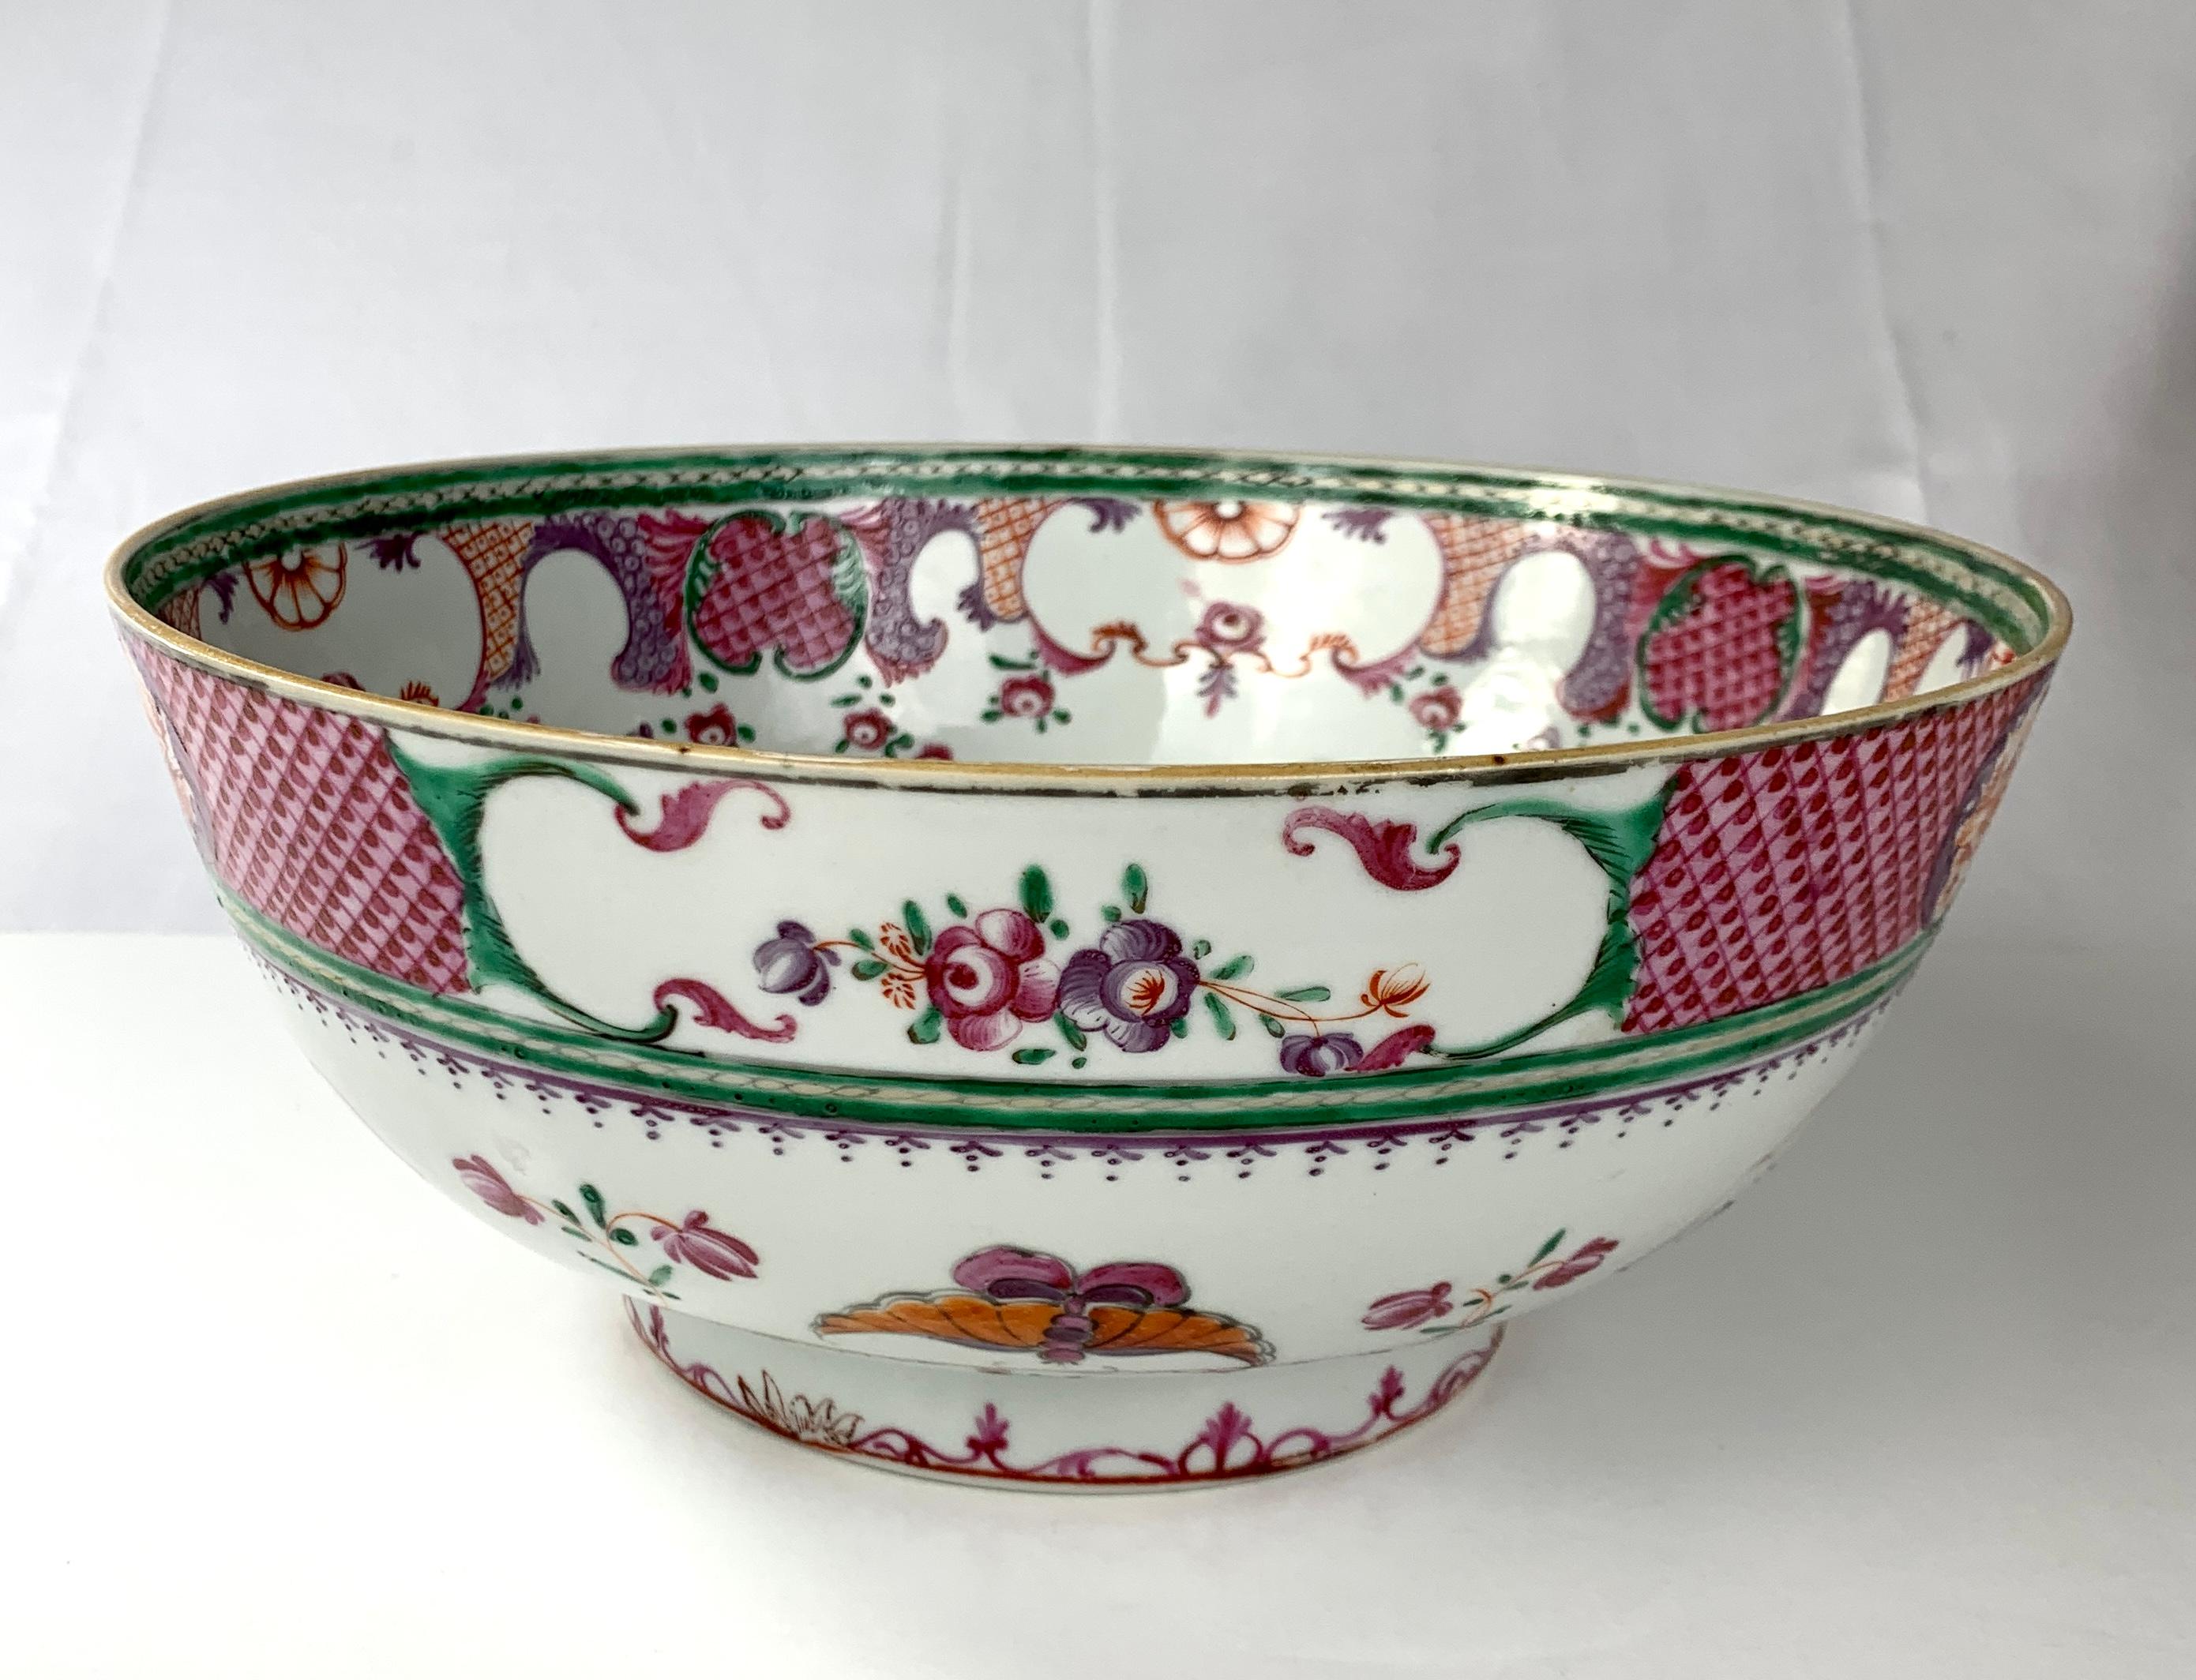 This lovely Chinese porcelain bowl was hand-painted in Famille Rose shades of deep purple, orange, and green.
The outside of this beautiful bowl features a top band of purple diamond patterns inset with panels of blooming peonies and small